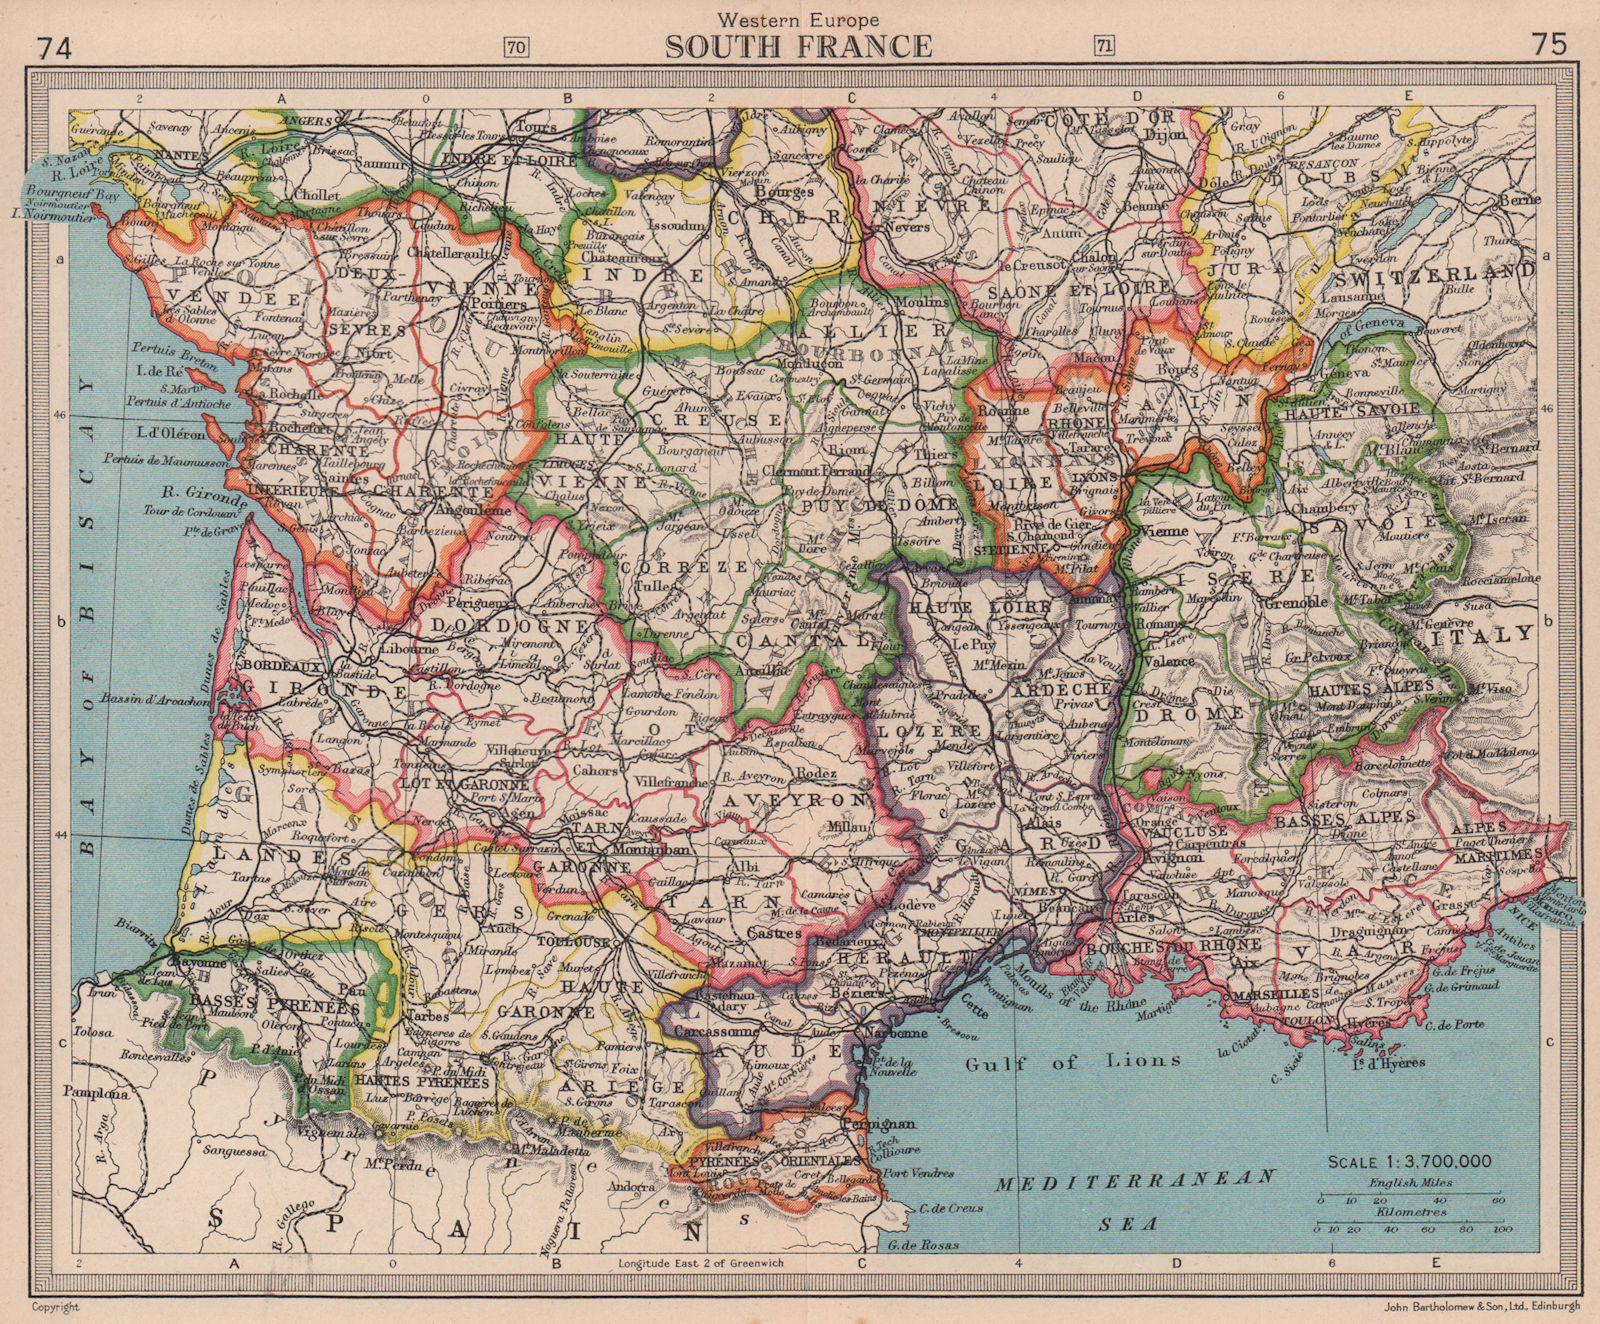 Associate Product Southern France in old provinces. BARTHOLOMEW 1949 vintage map plan chart